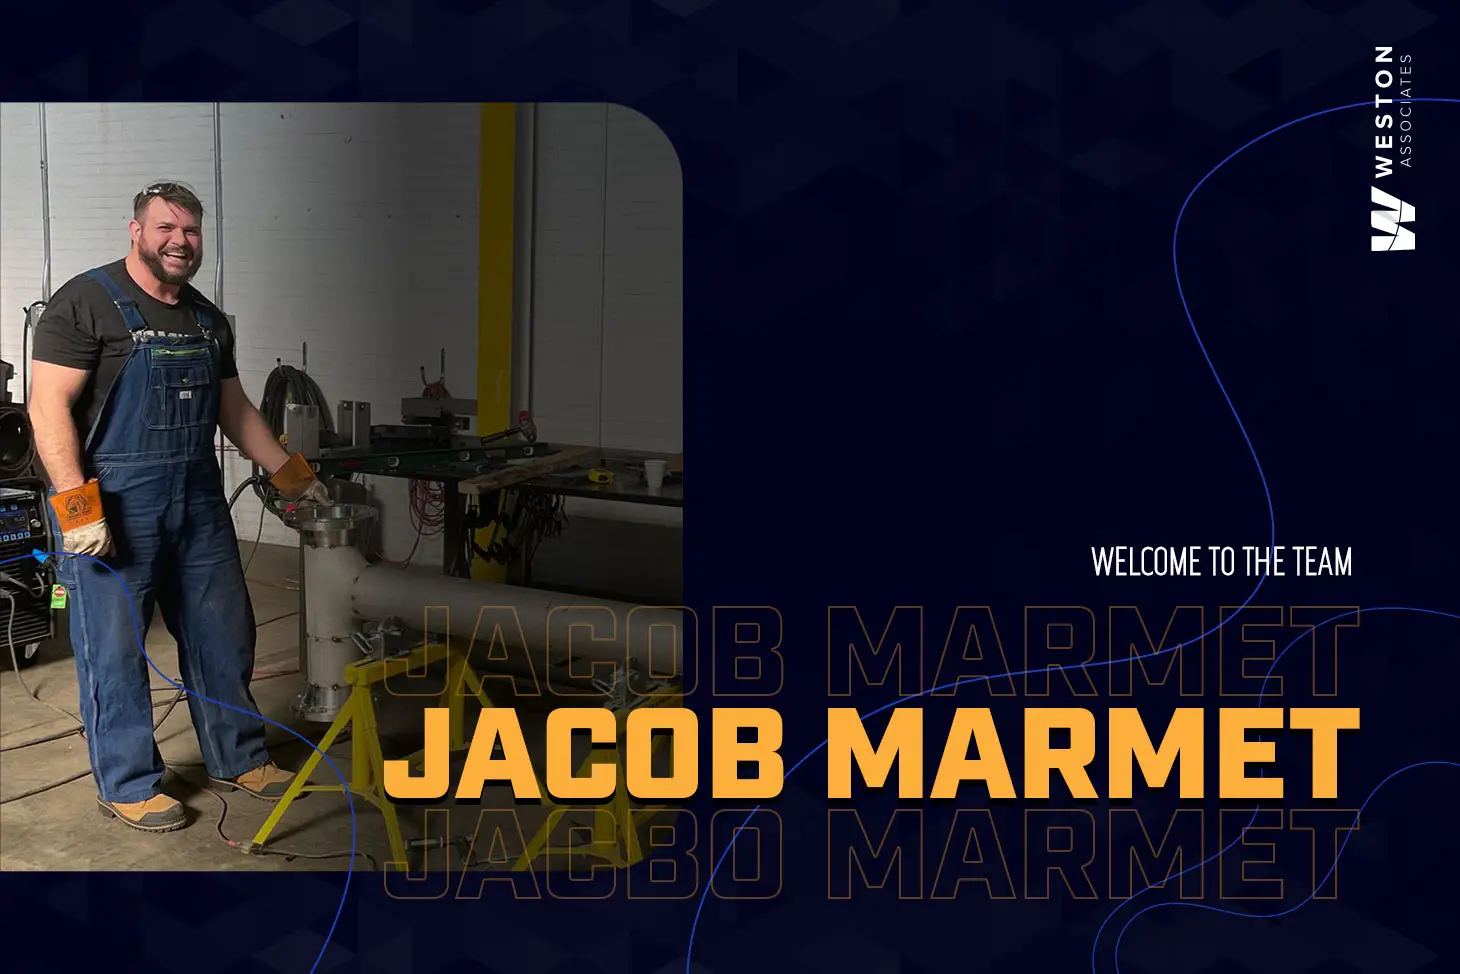 We're excited to welcome Jacob Marmet! featured image